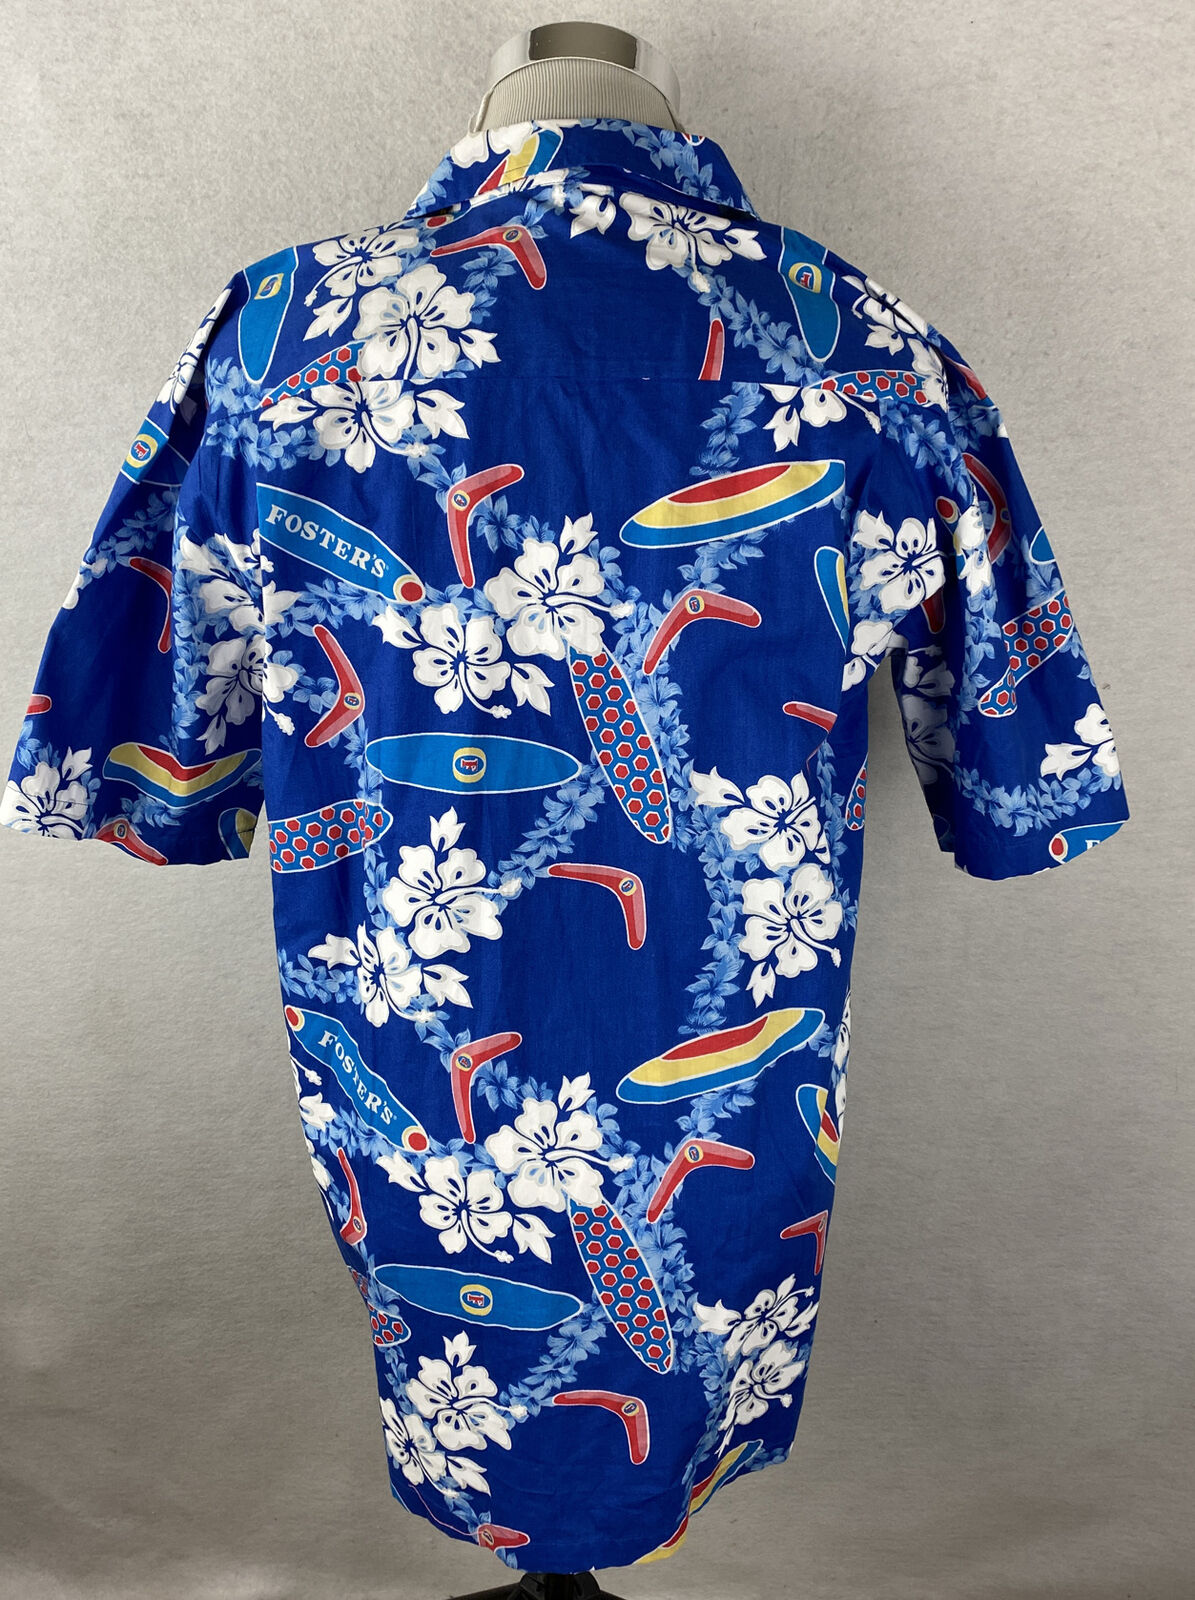 Fosters lager Hawaiian Shirt, Beach shorts - Picture 1